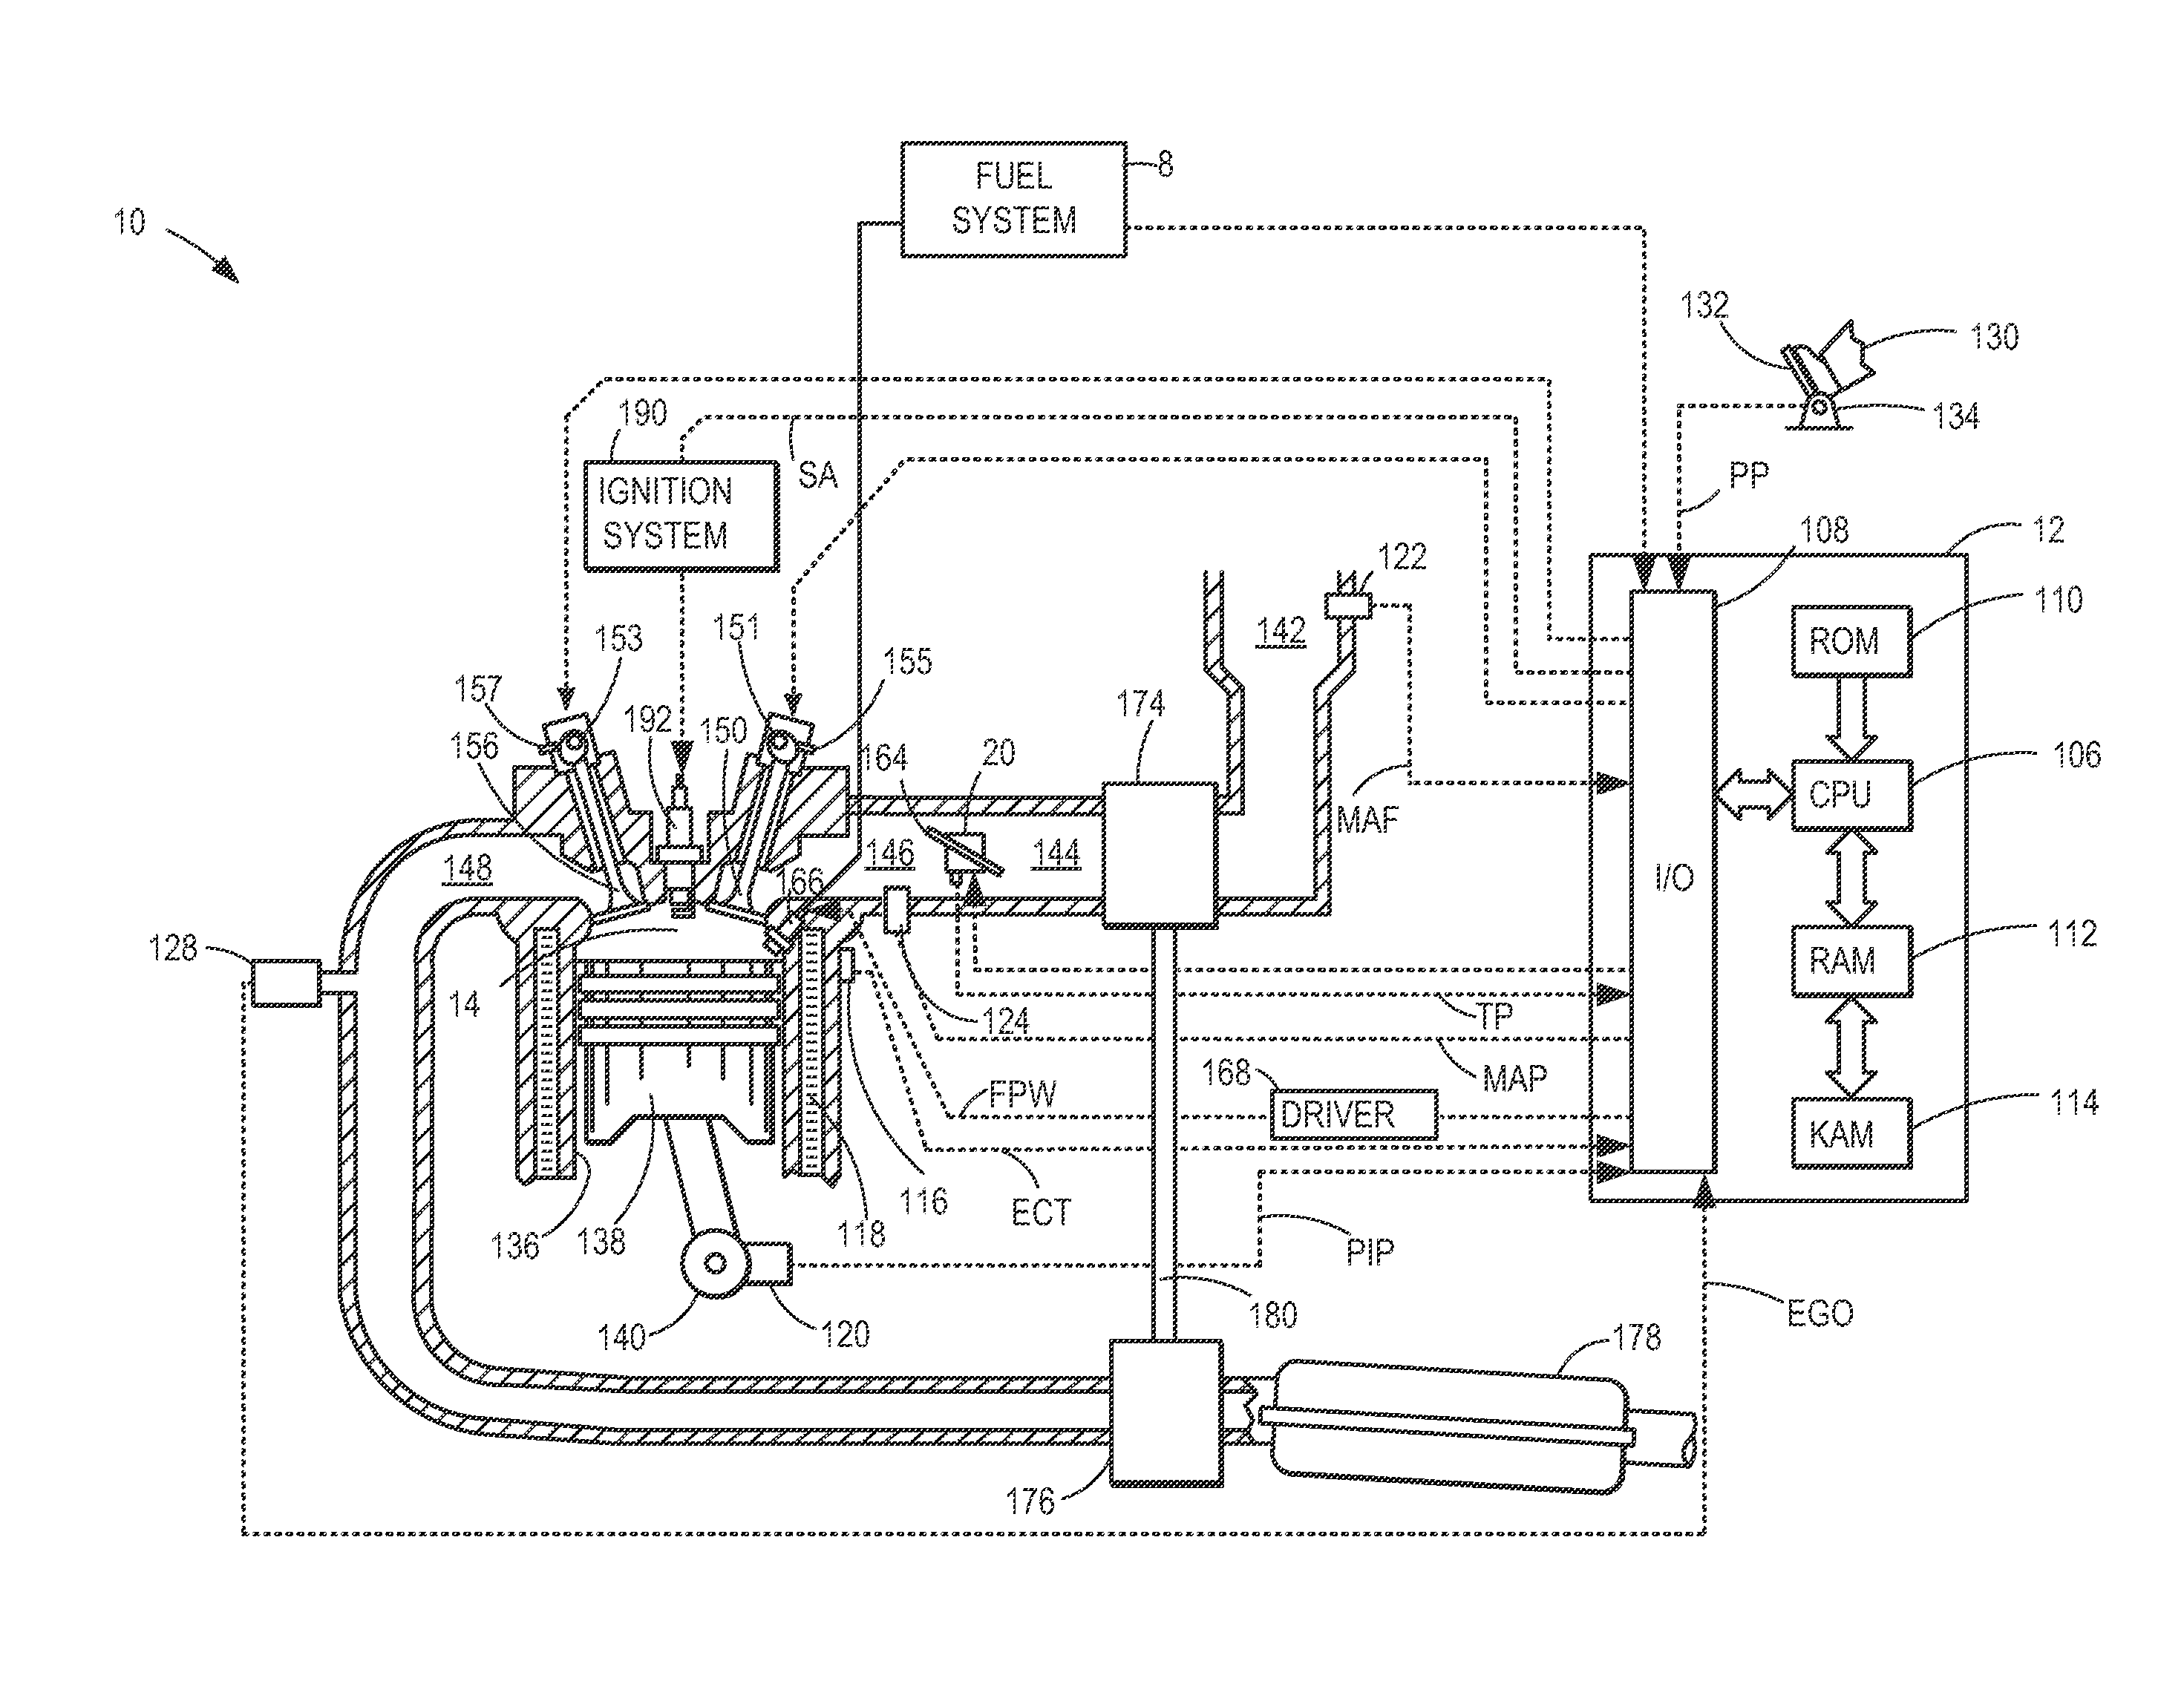 Fuel-based injection control